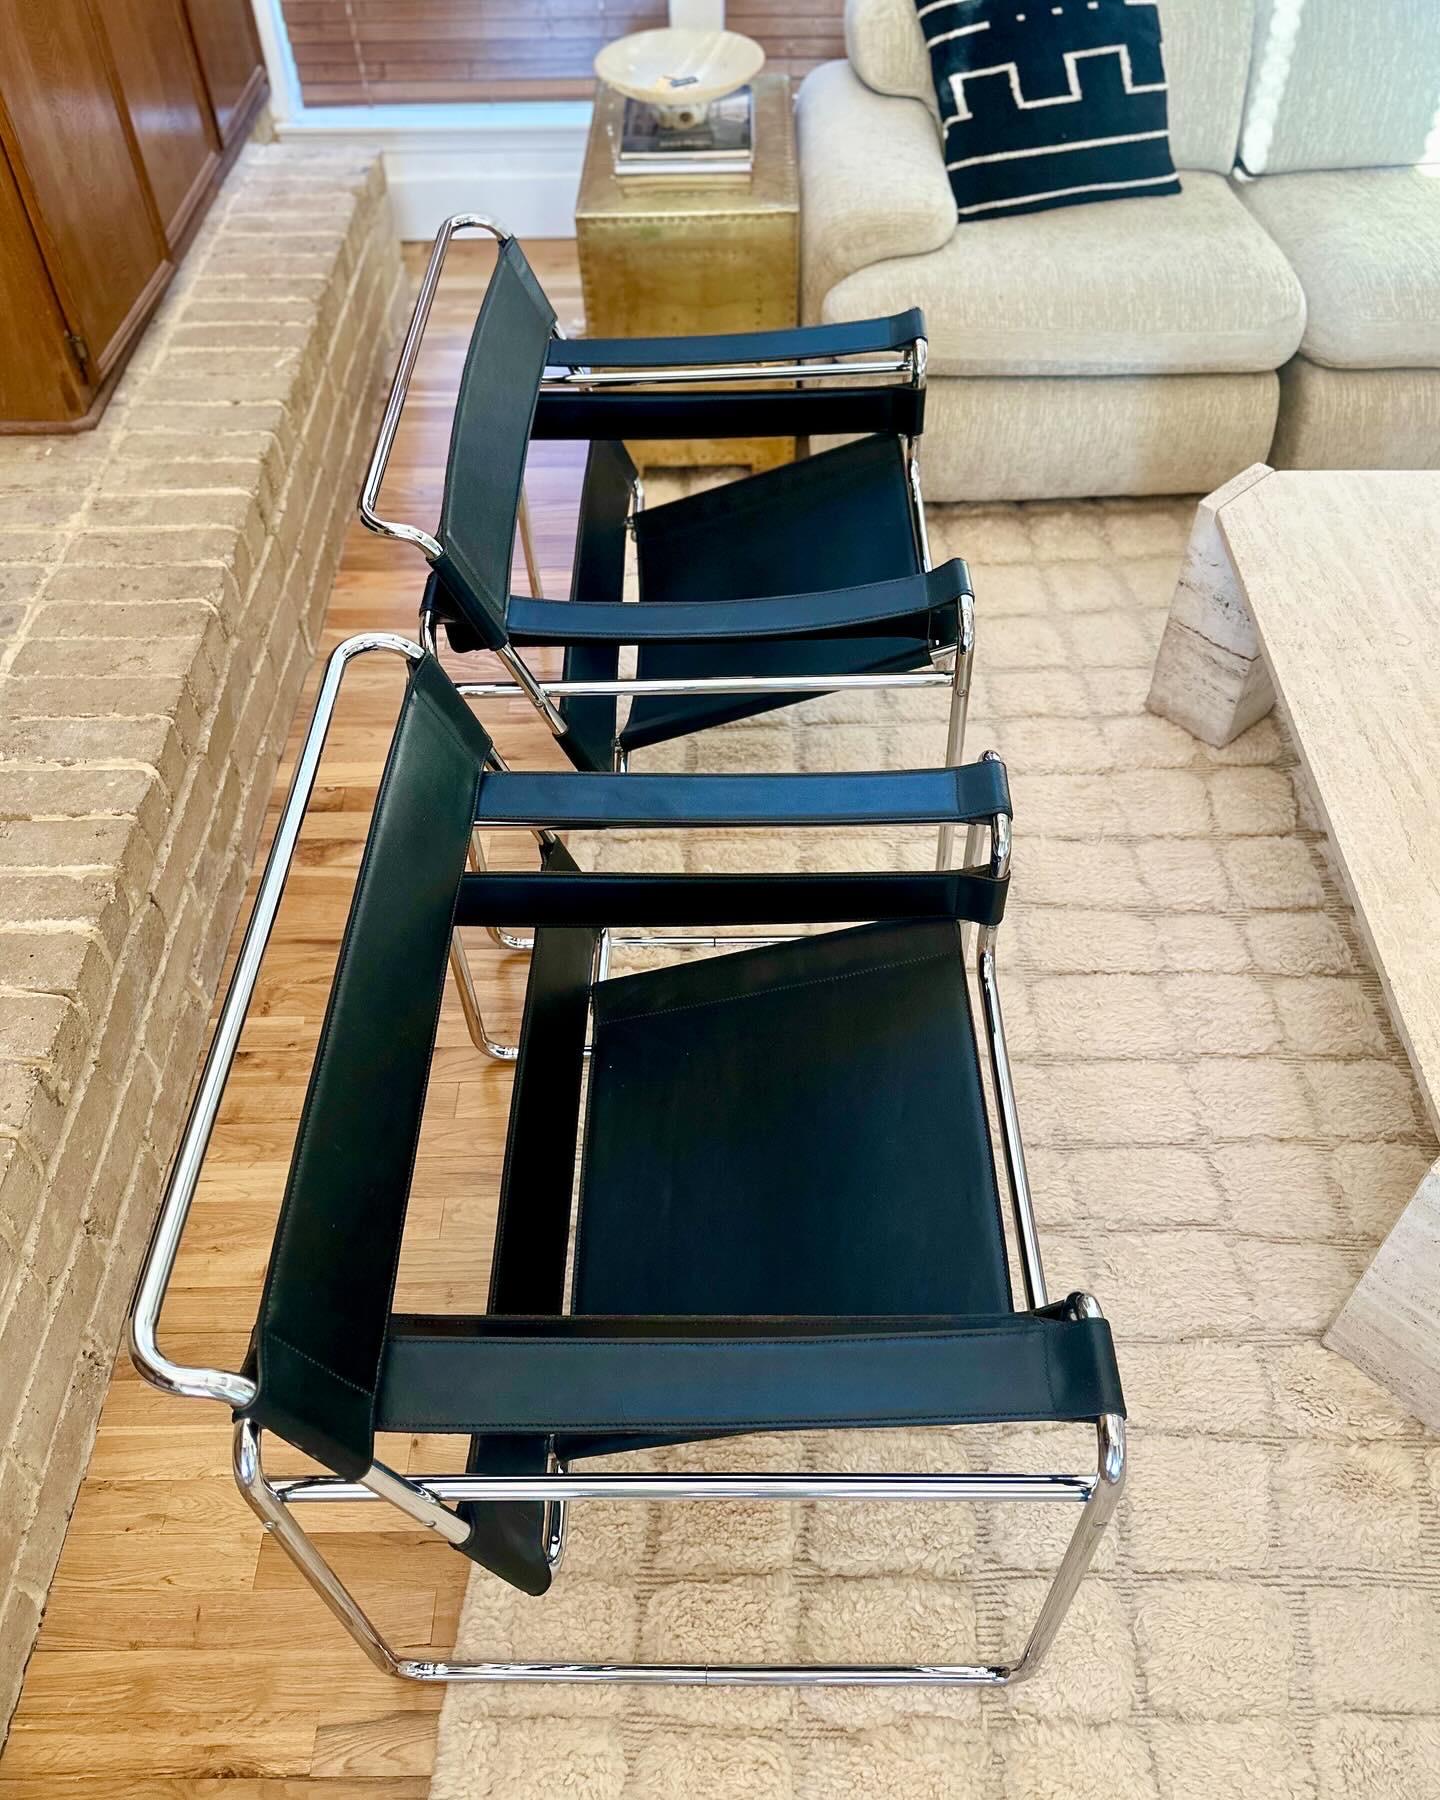 Bauhaus 1970s Wassily Style Chairs After Marcel Breuer - a pair